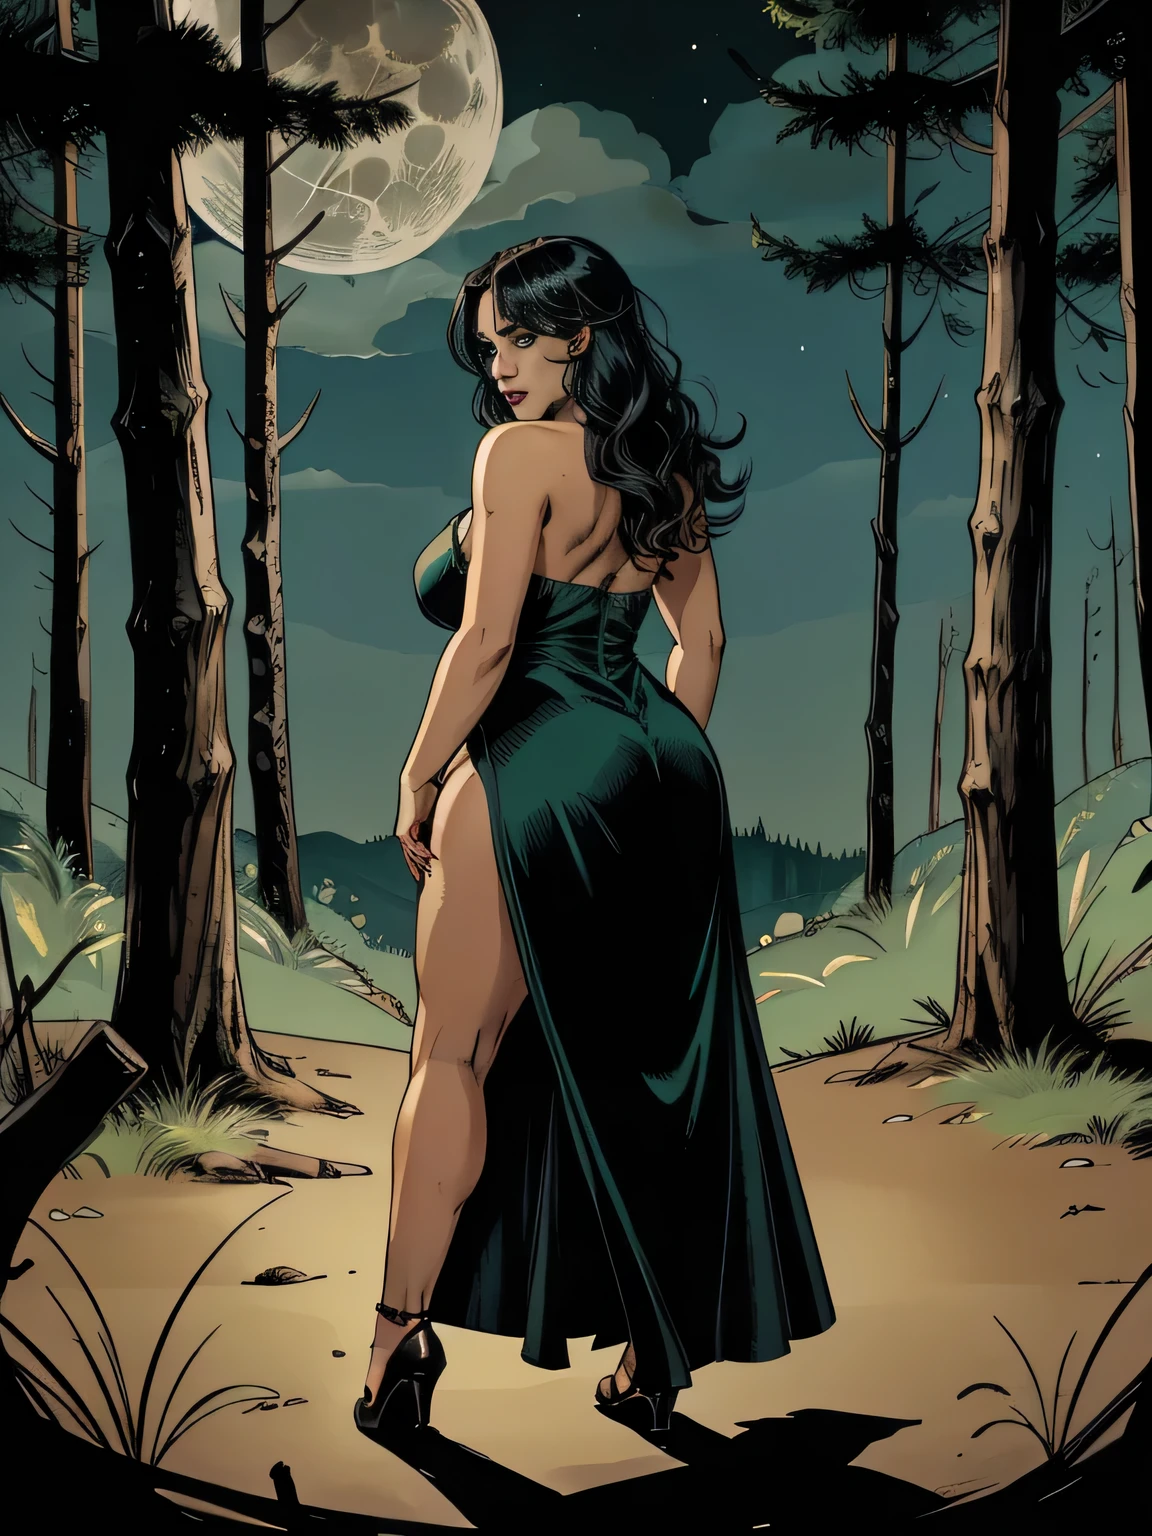 sexy sorceress, evil illusionist, very muscular, curvy, large breasts, thick thighs, long legs, feet in frame, diaphanous green dress, big breasts, arched back, large booty, sweaty, in the forest, nighttime, full moon, standing over cauldron, nylon pantyhose, super long dress blows in the wind